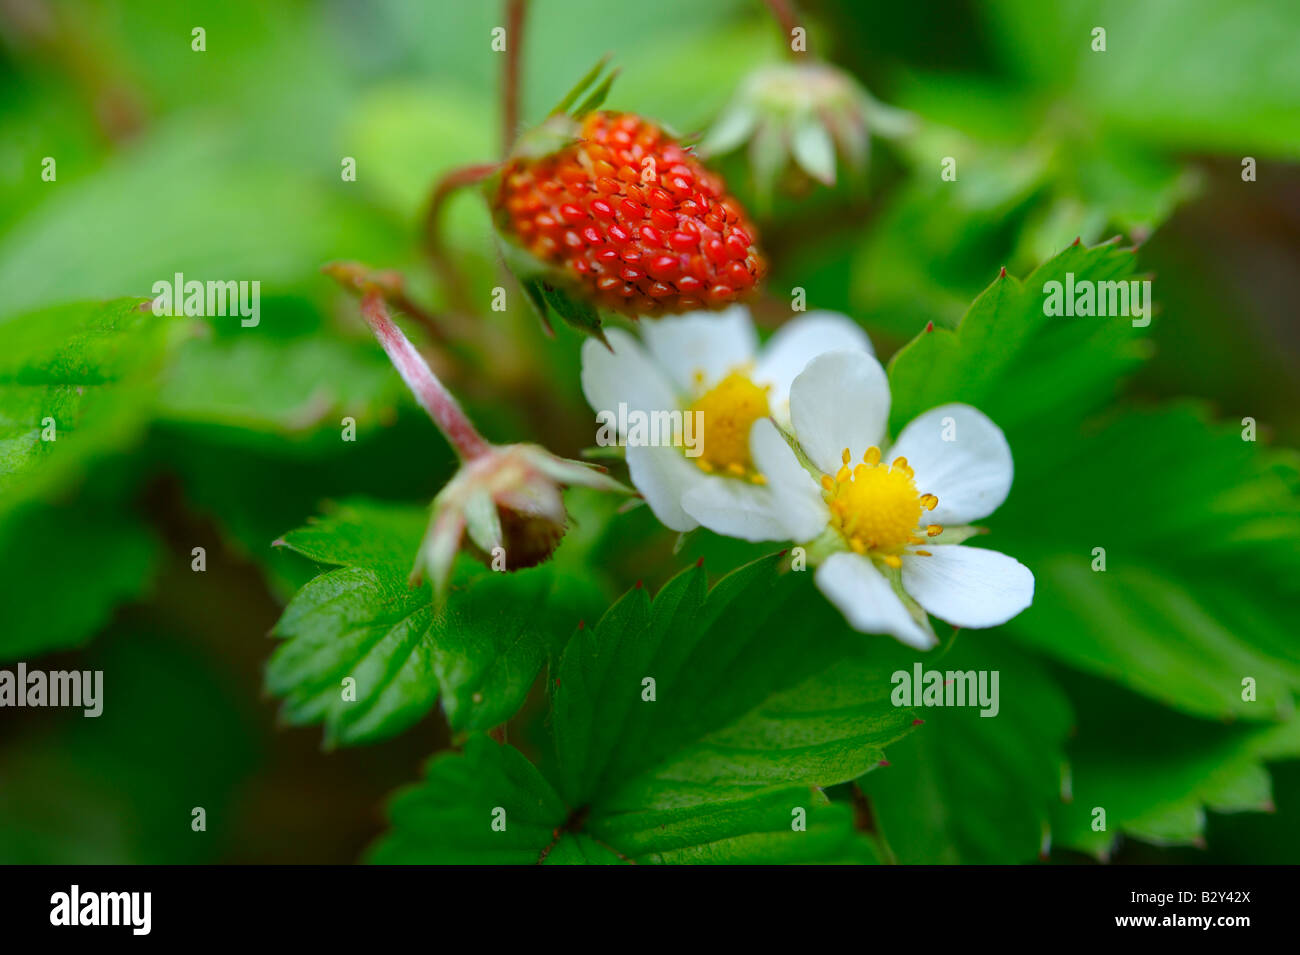 Wild strawberry and wild strawberry flower on a strawberry plant growing  in a garden Stock Photo